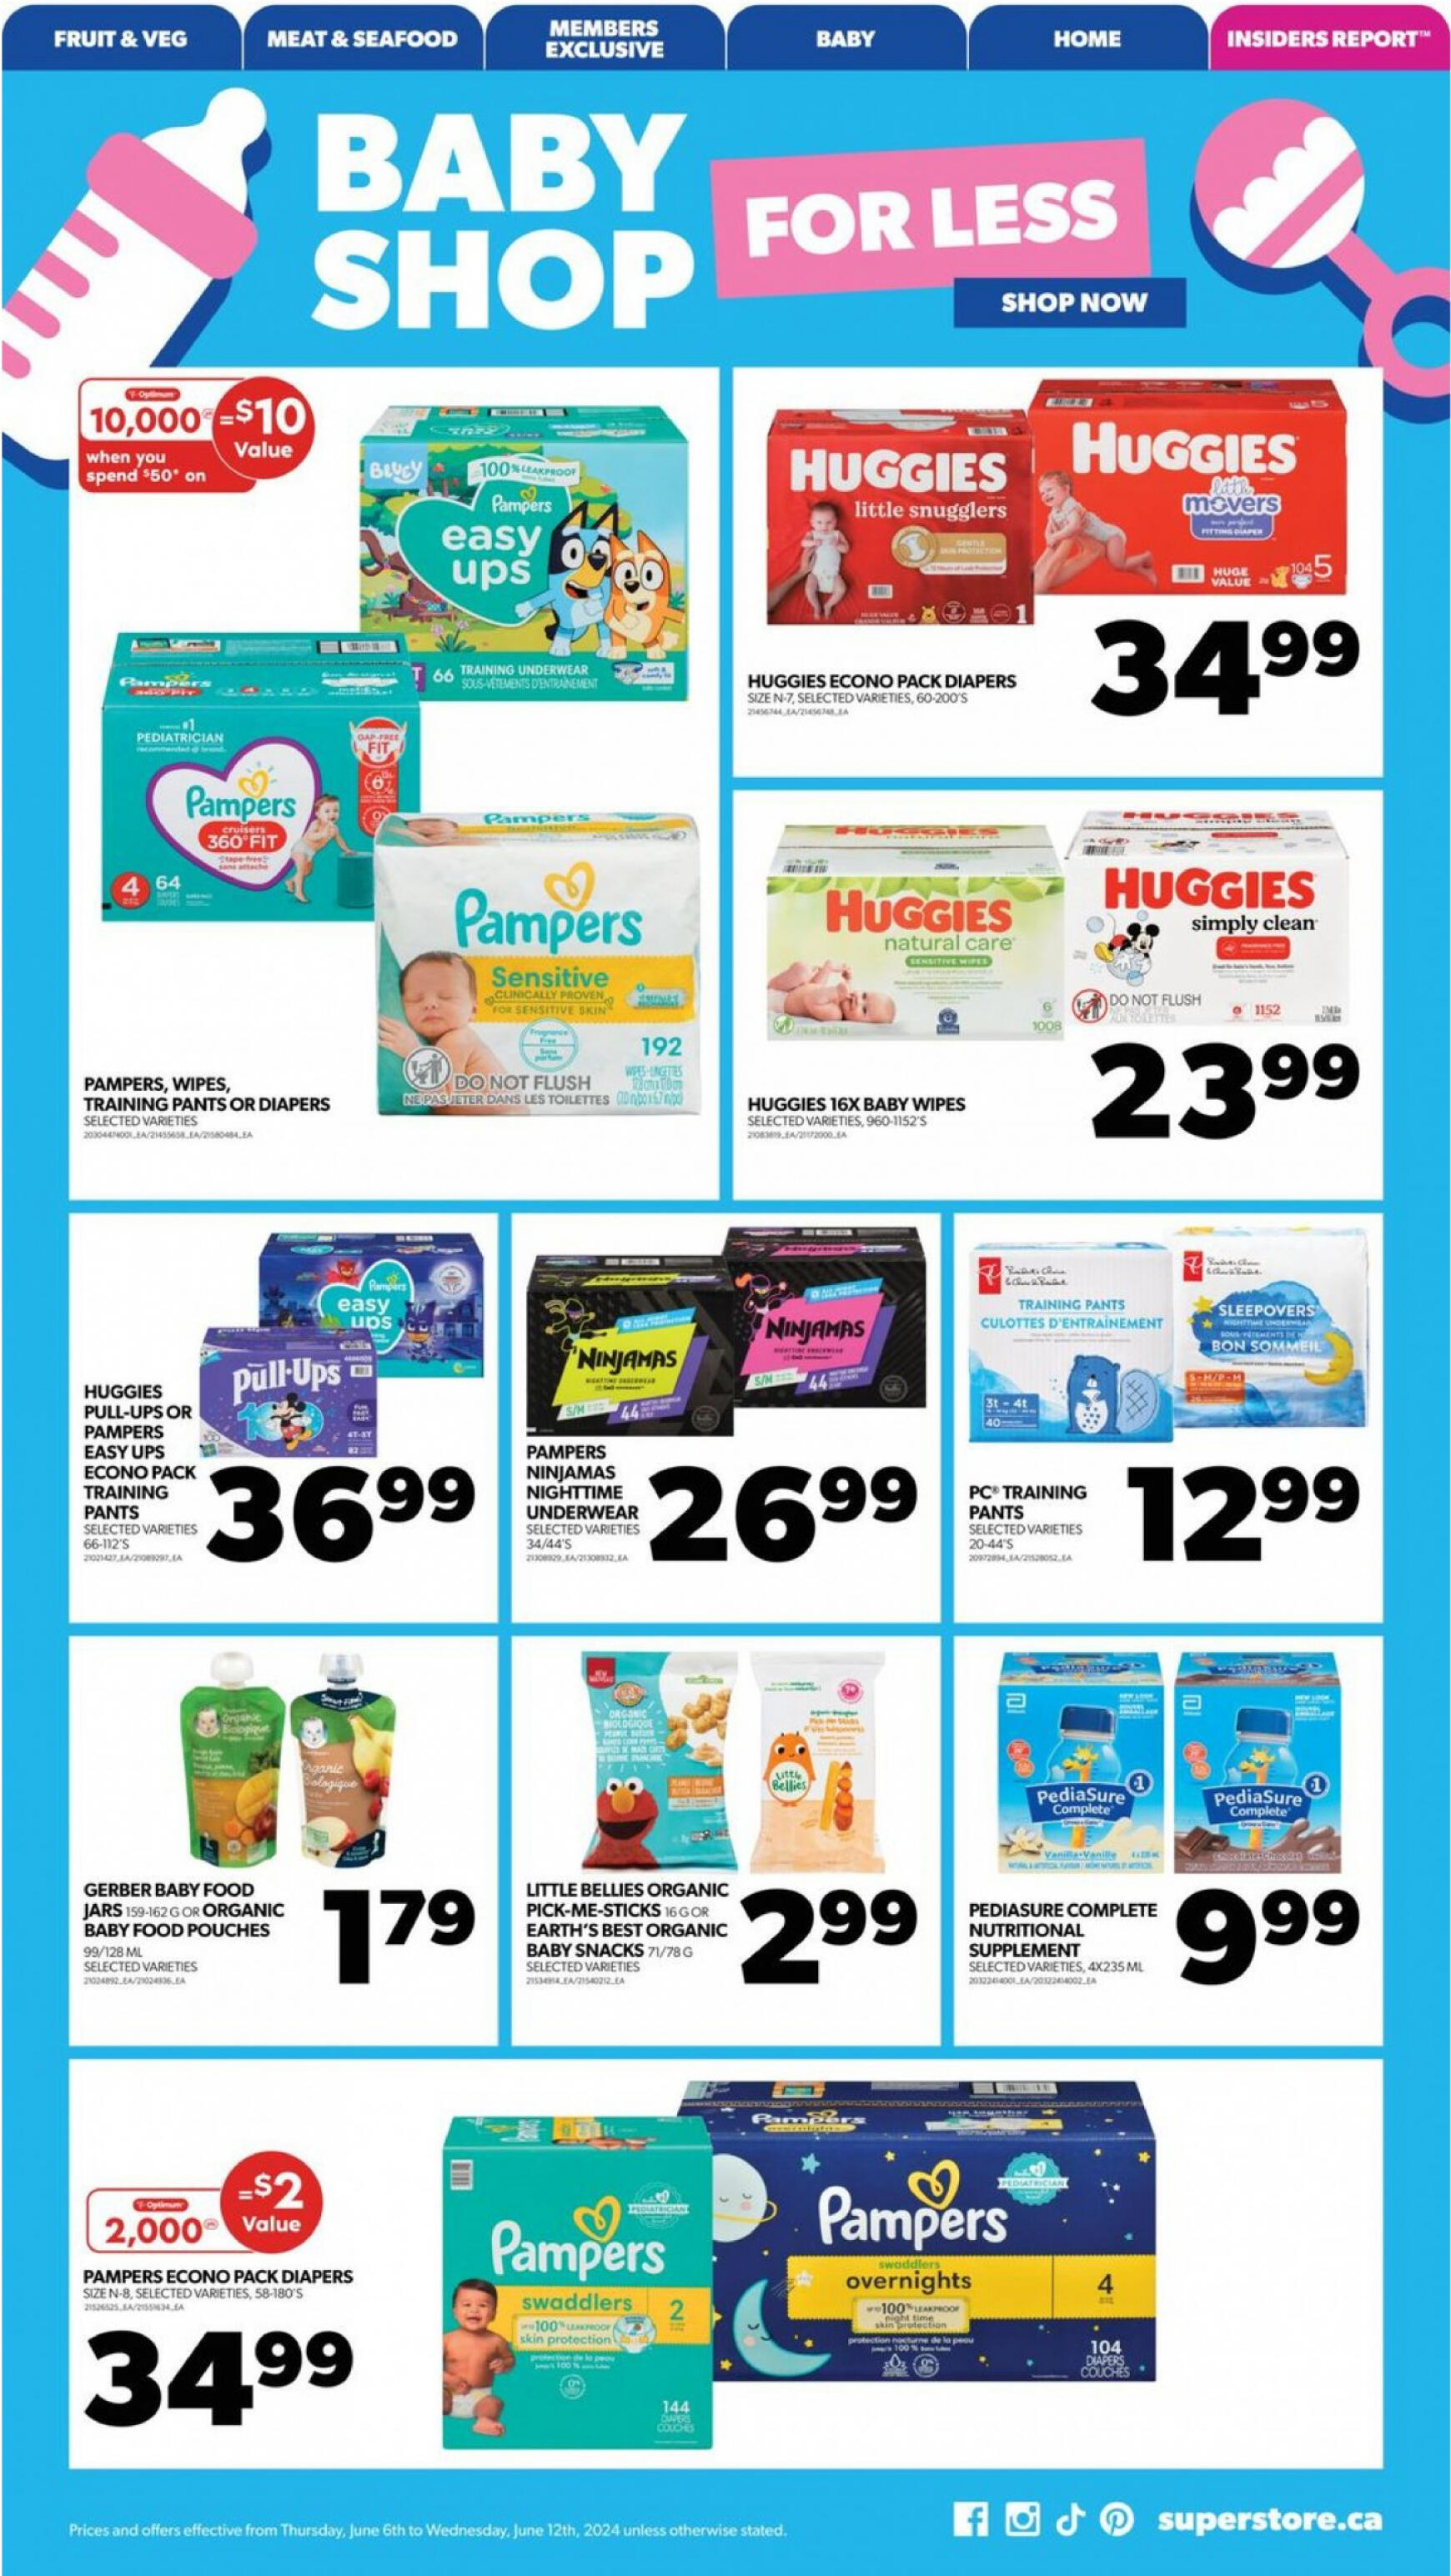 real-canadian-superstore - Real Canadian Superstore flyer current 06.06. - 12.06. - page: 19